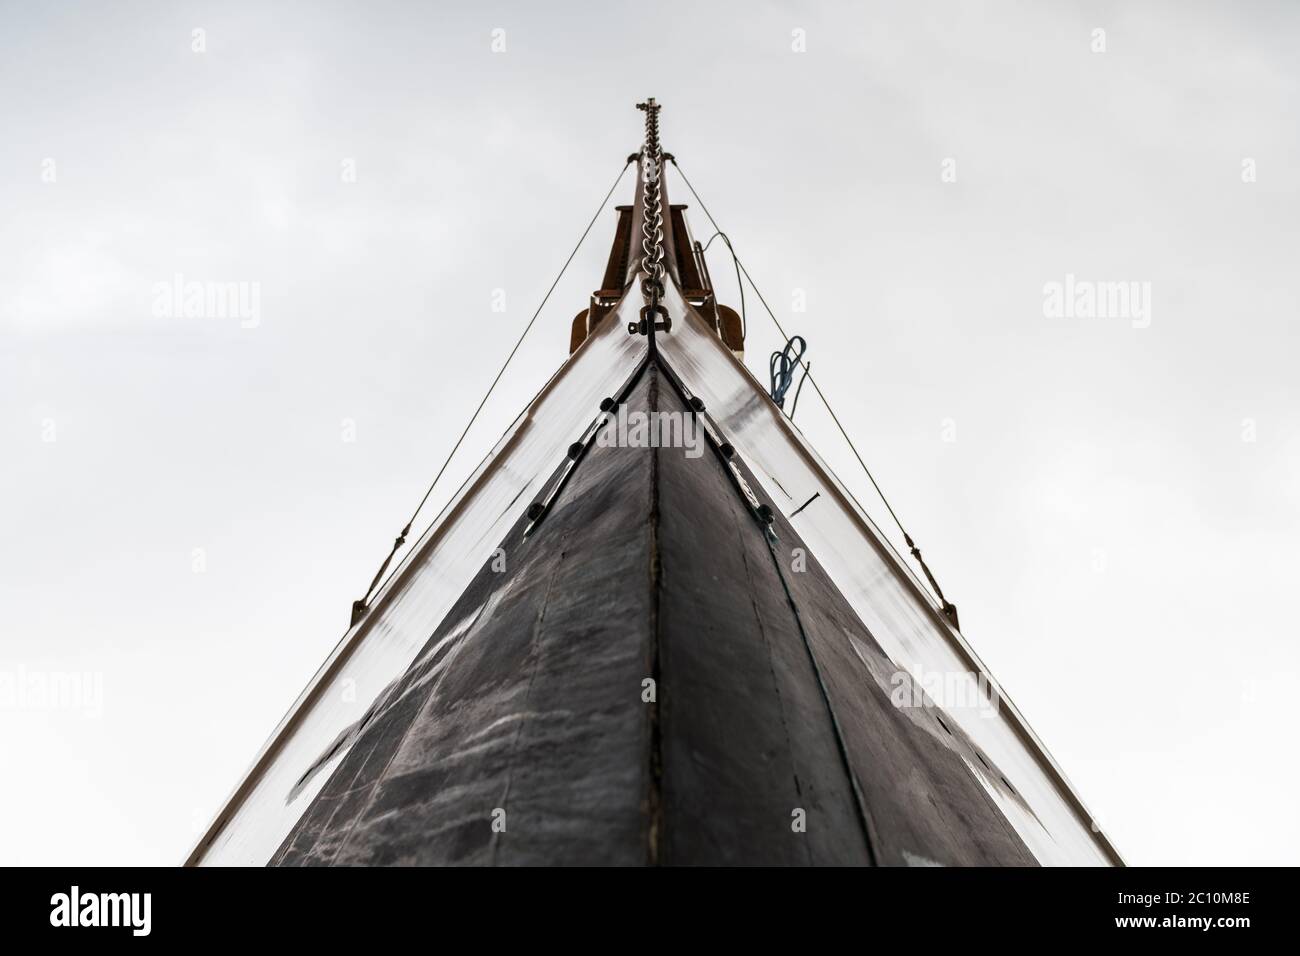 Low angle-view of the bow of a wooden luxury sail boat against a cloudy sky. Stock Photo